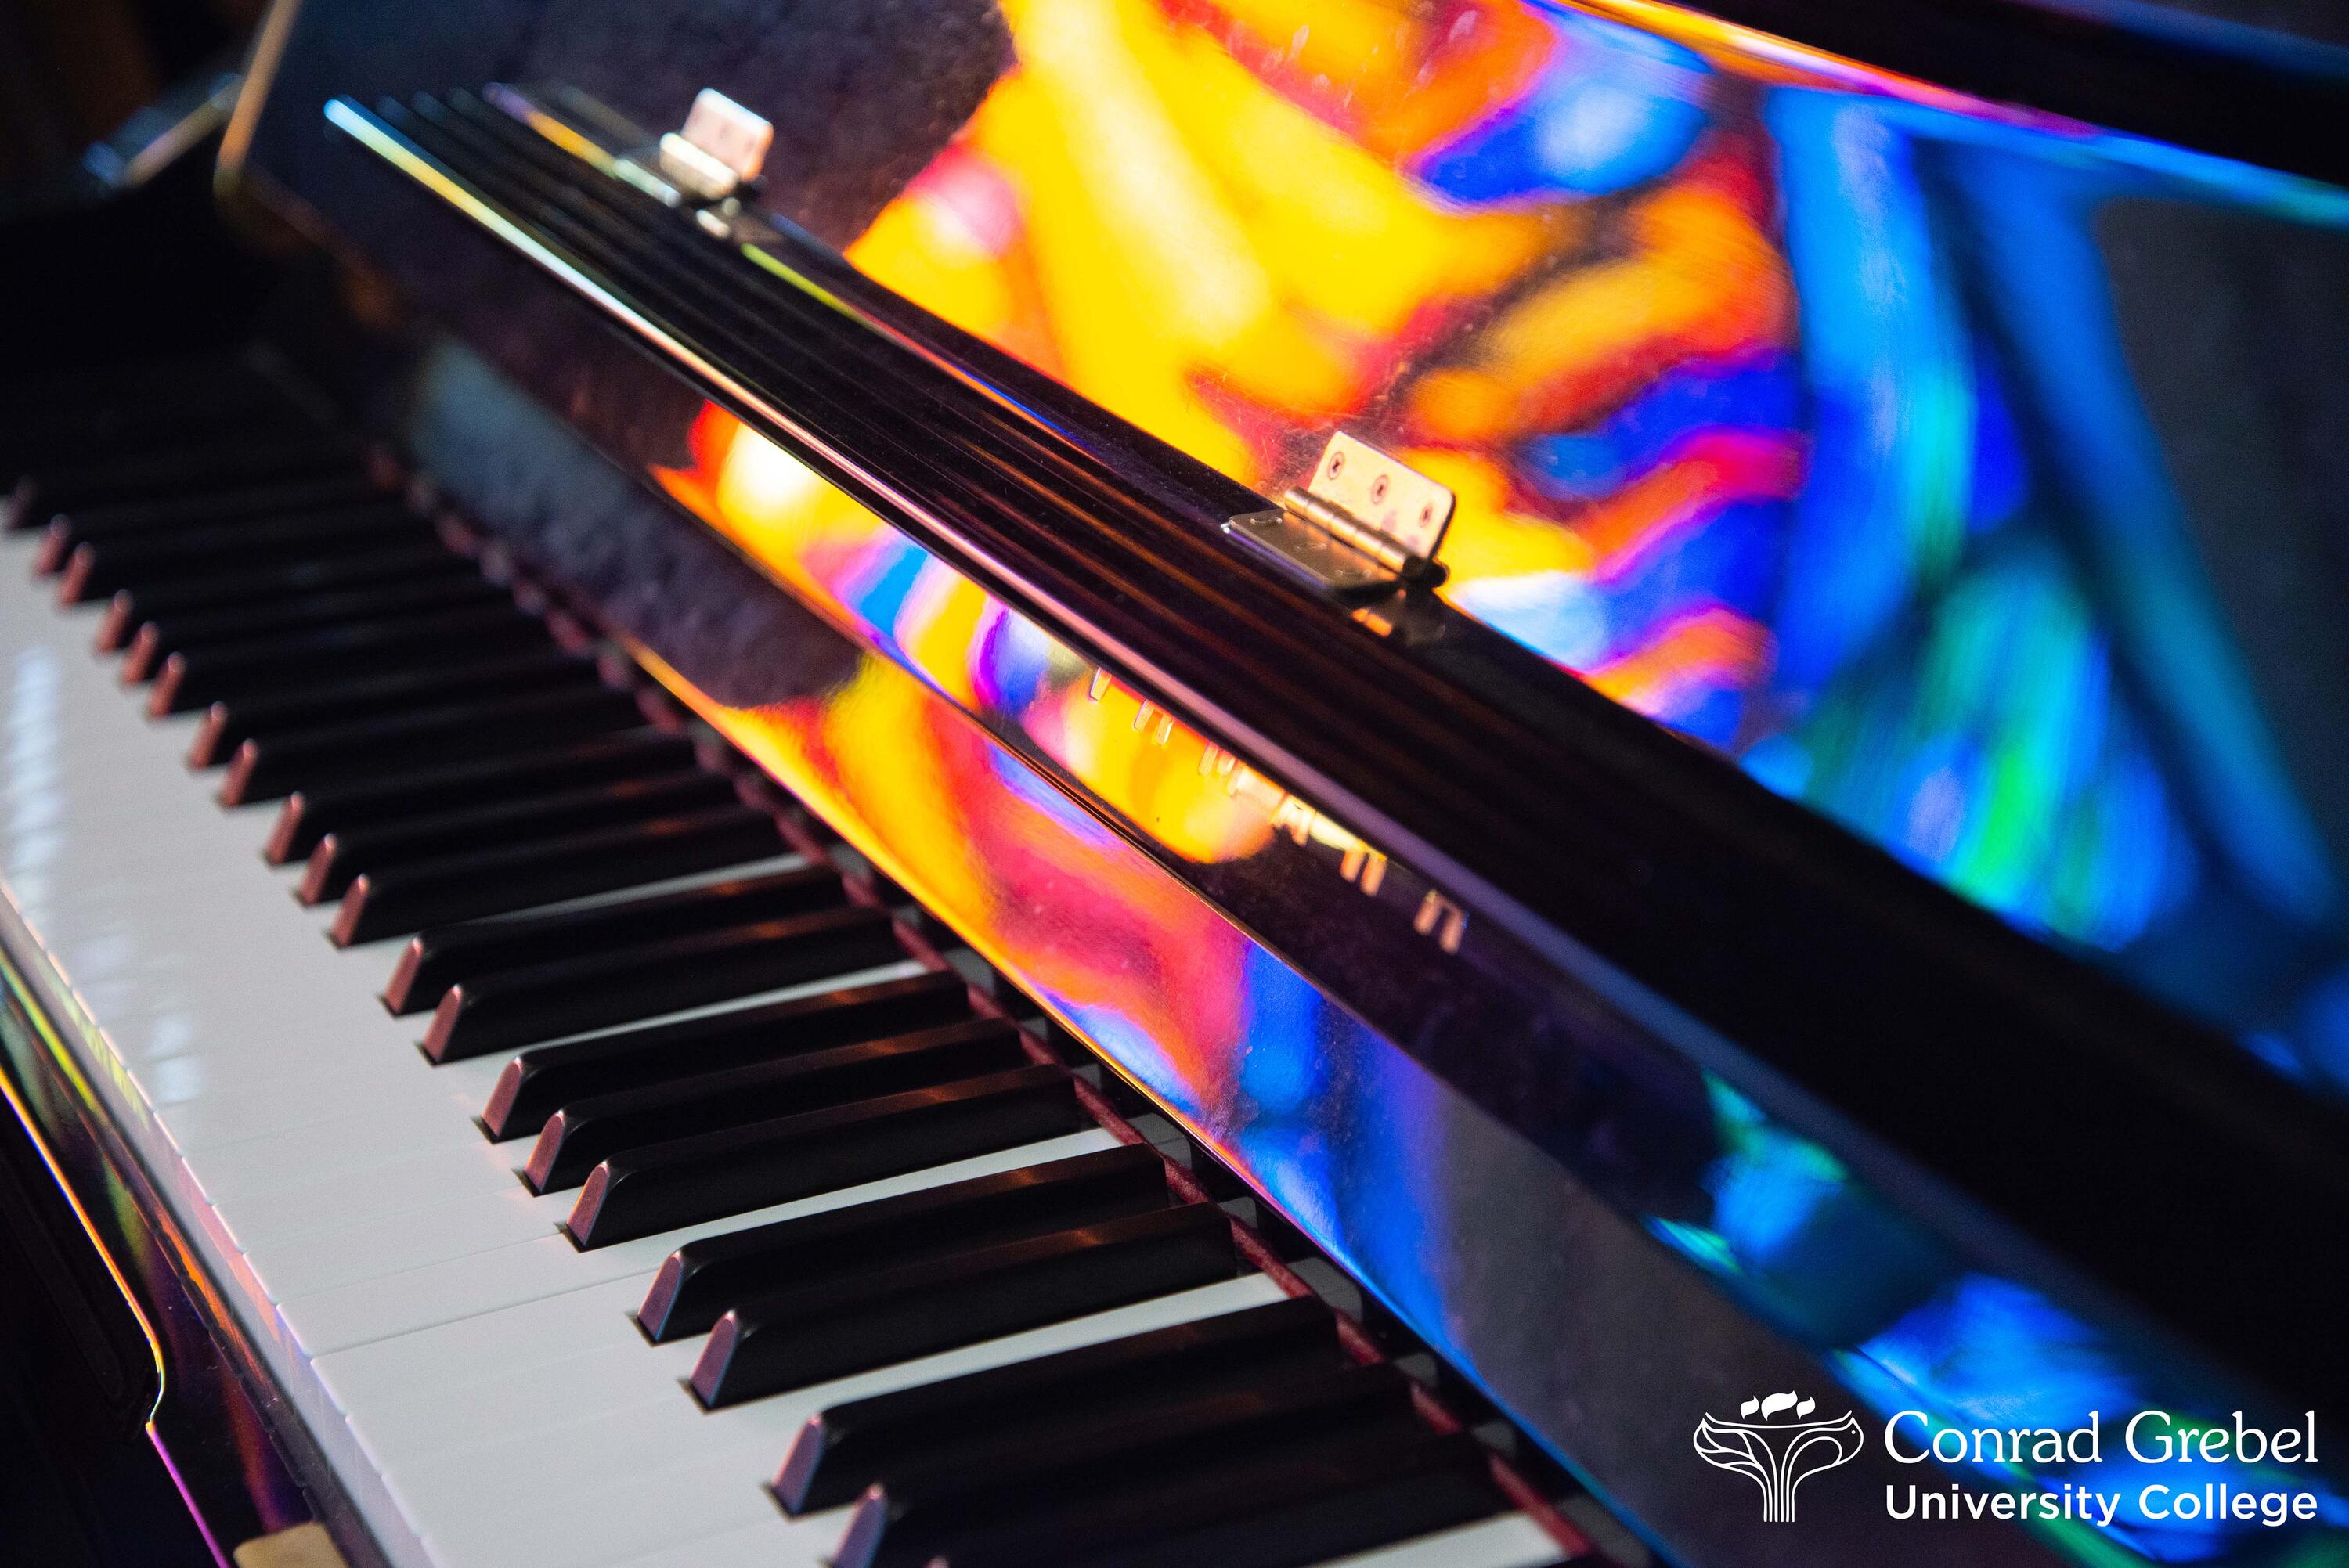 Grebel piano with stain glass reflections